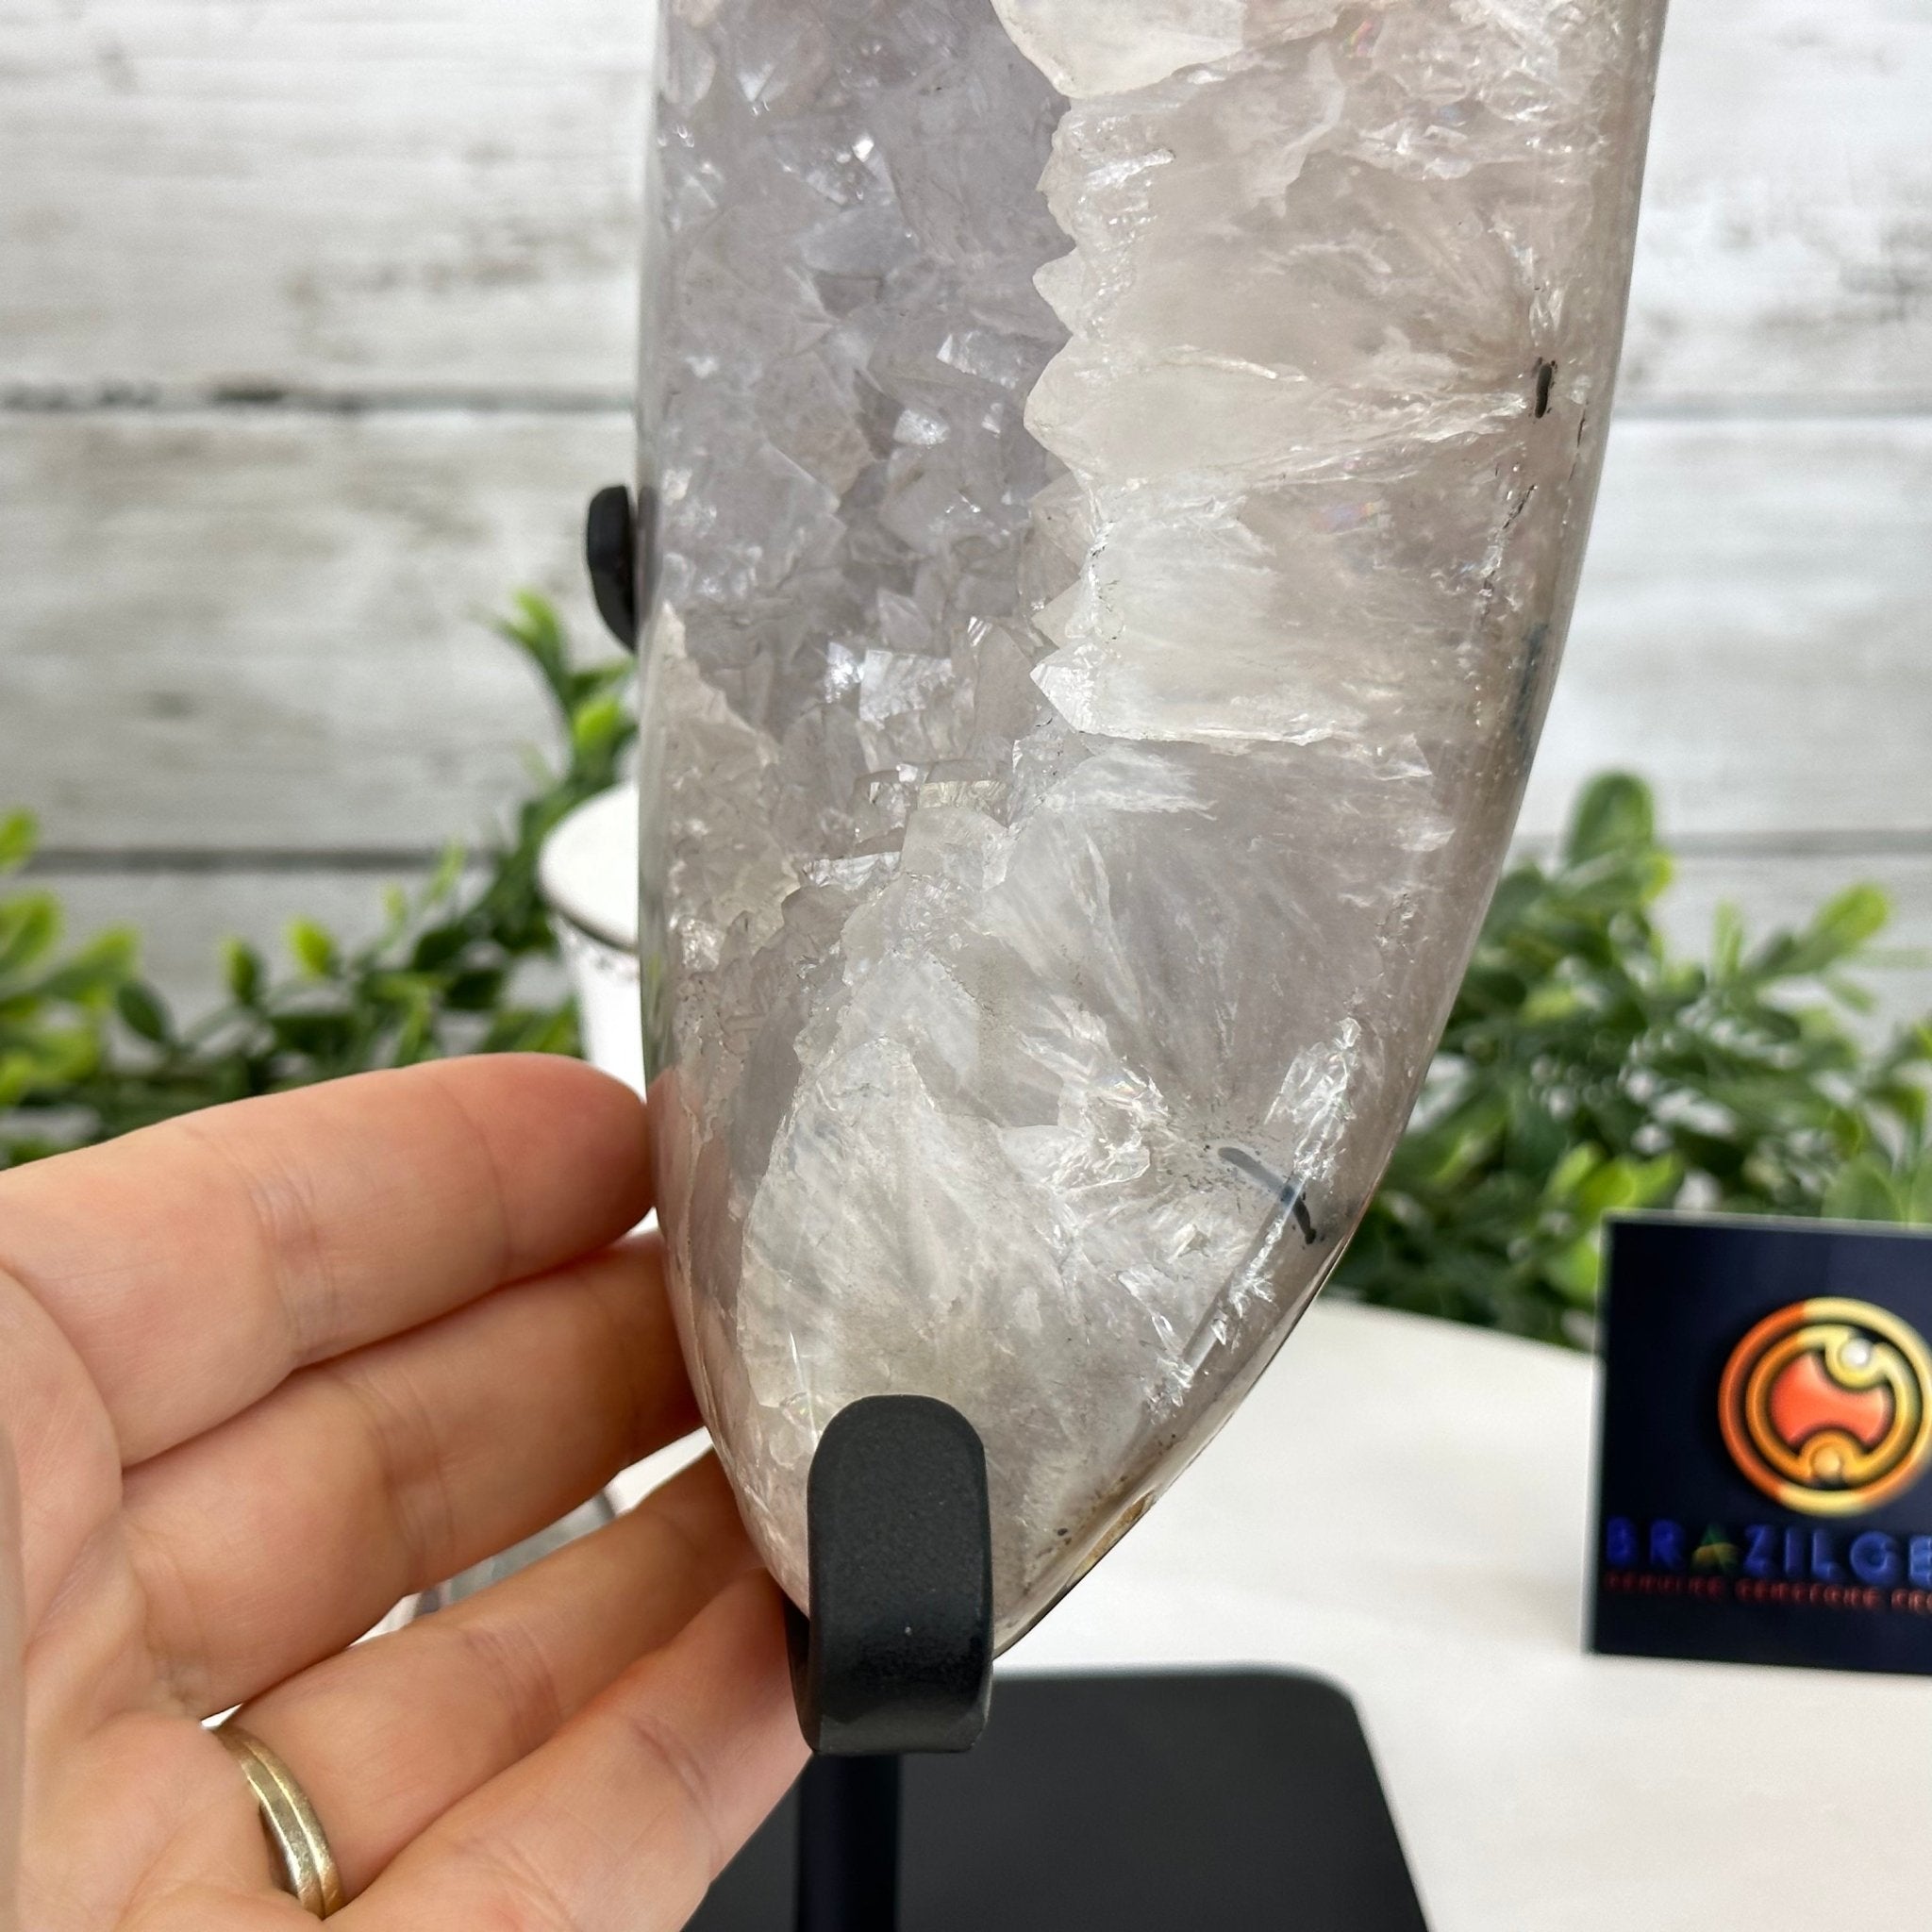 Polished Agate Crescent Moon on a Stand, 7.3 lbs & 11.75" Tall #5740NA-014 by Brazil Gems - Brazil GemsBrazil GemsPolished Agate Crescent Moon on a Stand, 7.3 lbs & 11.75" Tall #5740NA-014 by Brazil GemsCrescent Moons5740NA-014